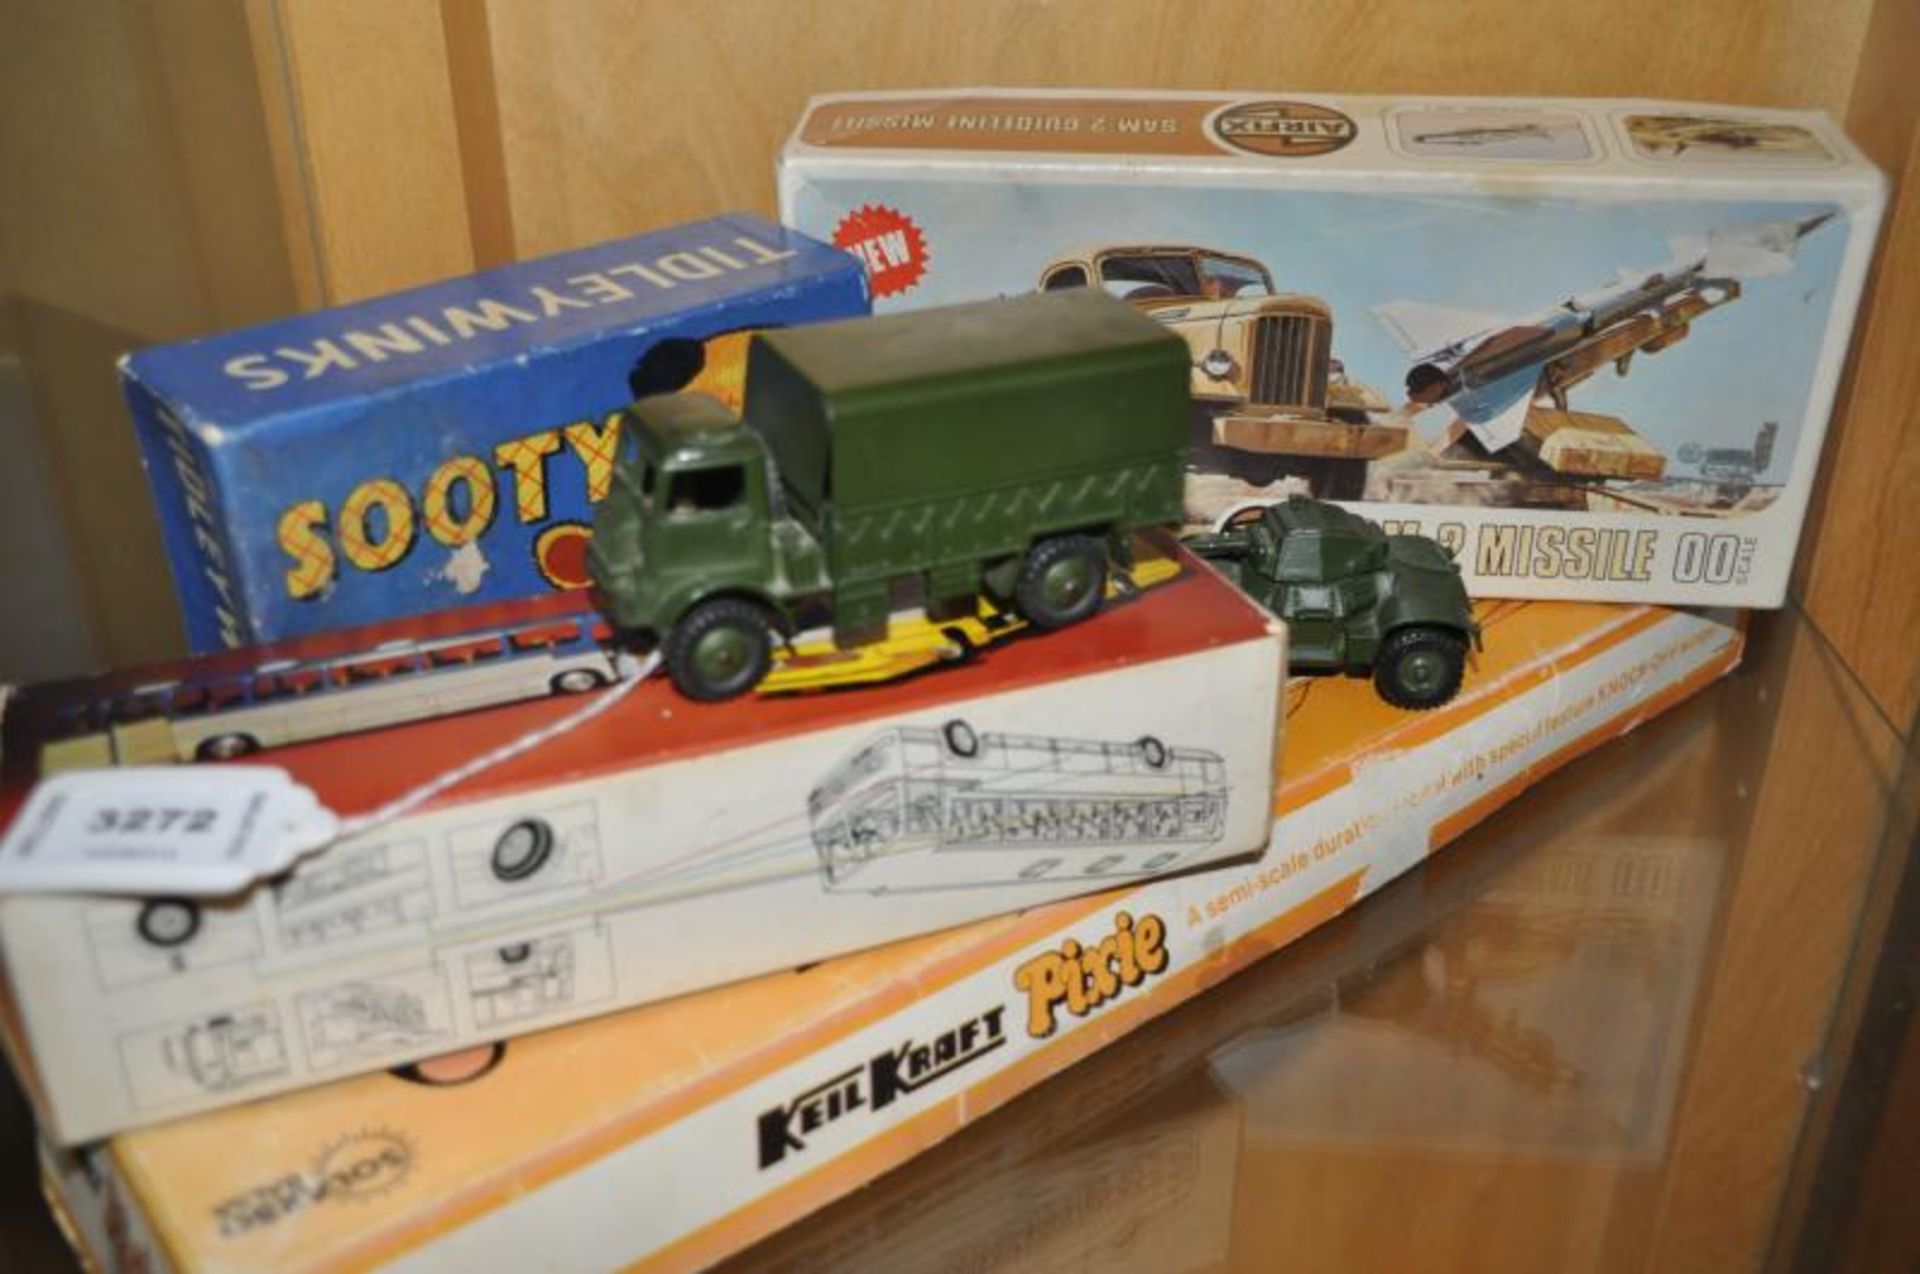 A boxed Airfix SAM-2 missile, scale model - Keil Kraft balsa wood glider kit, Sooty Tiddly Winks,